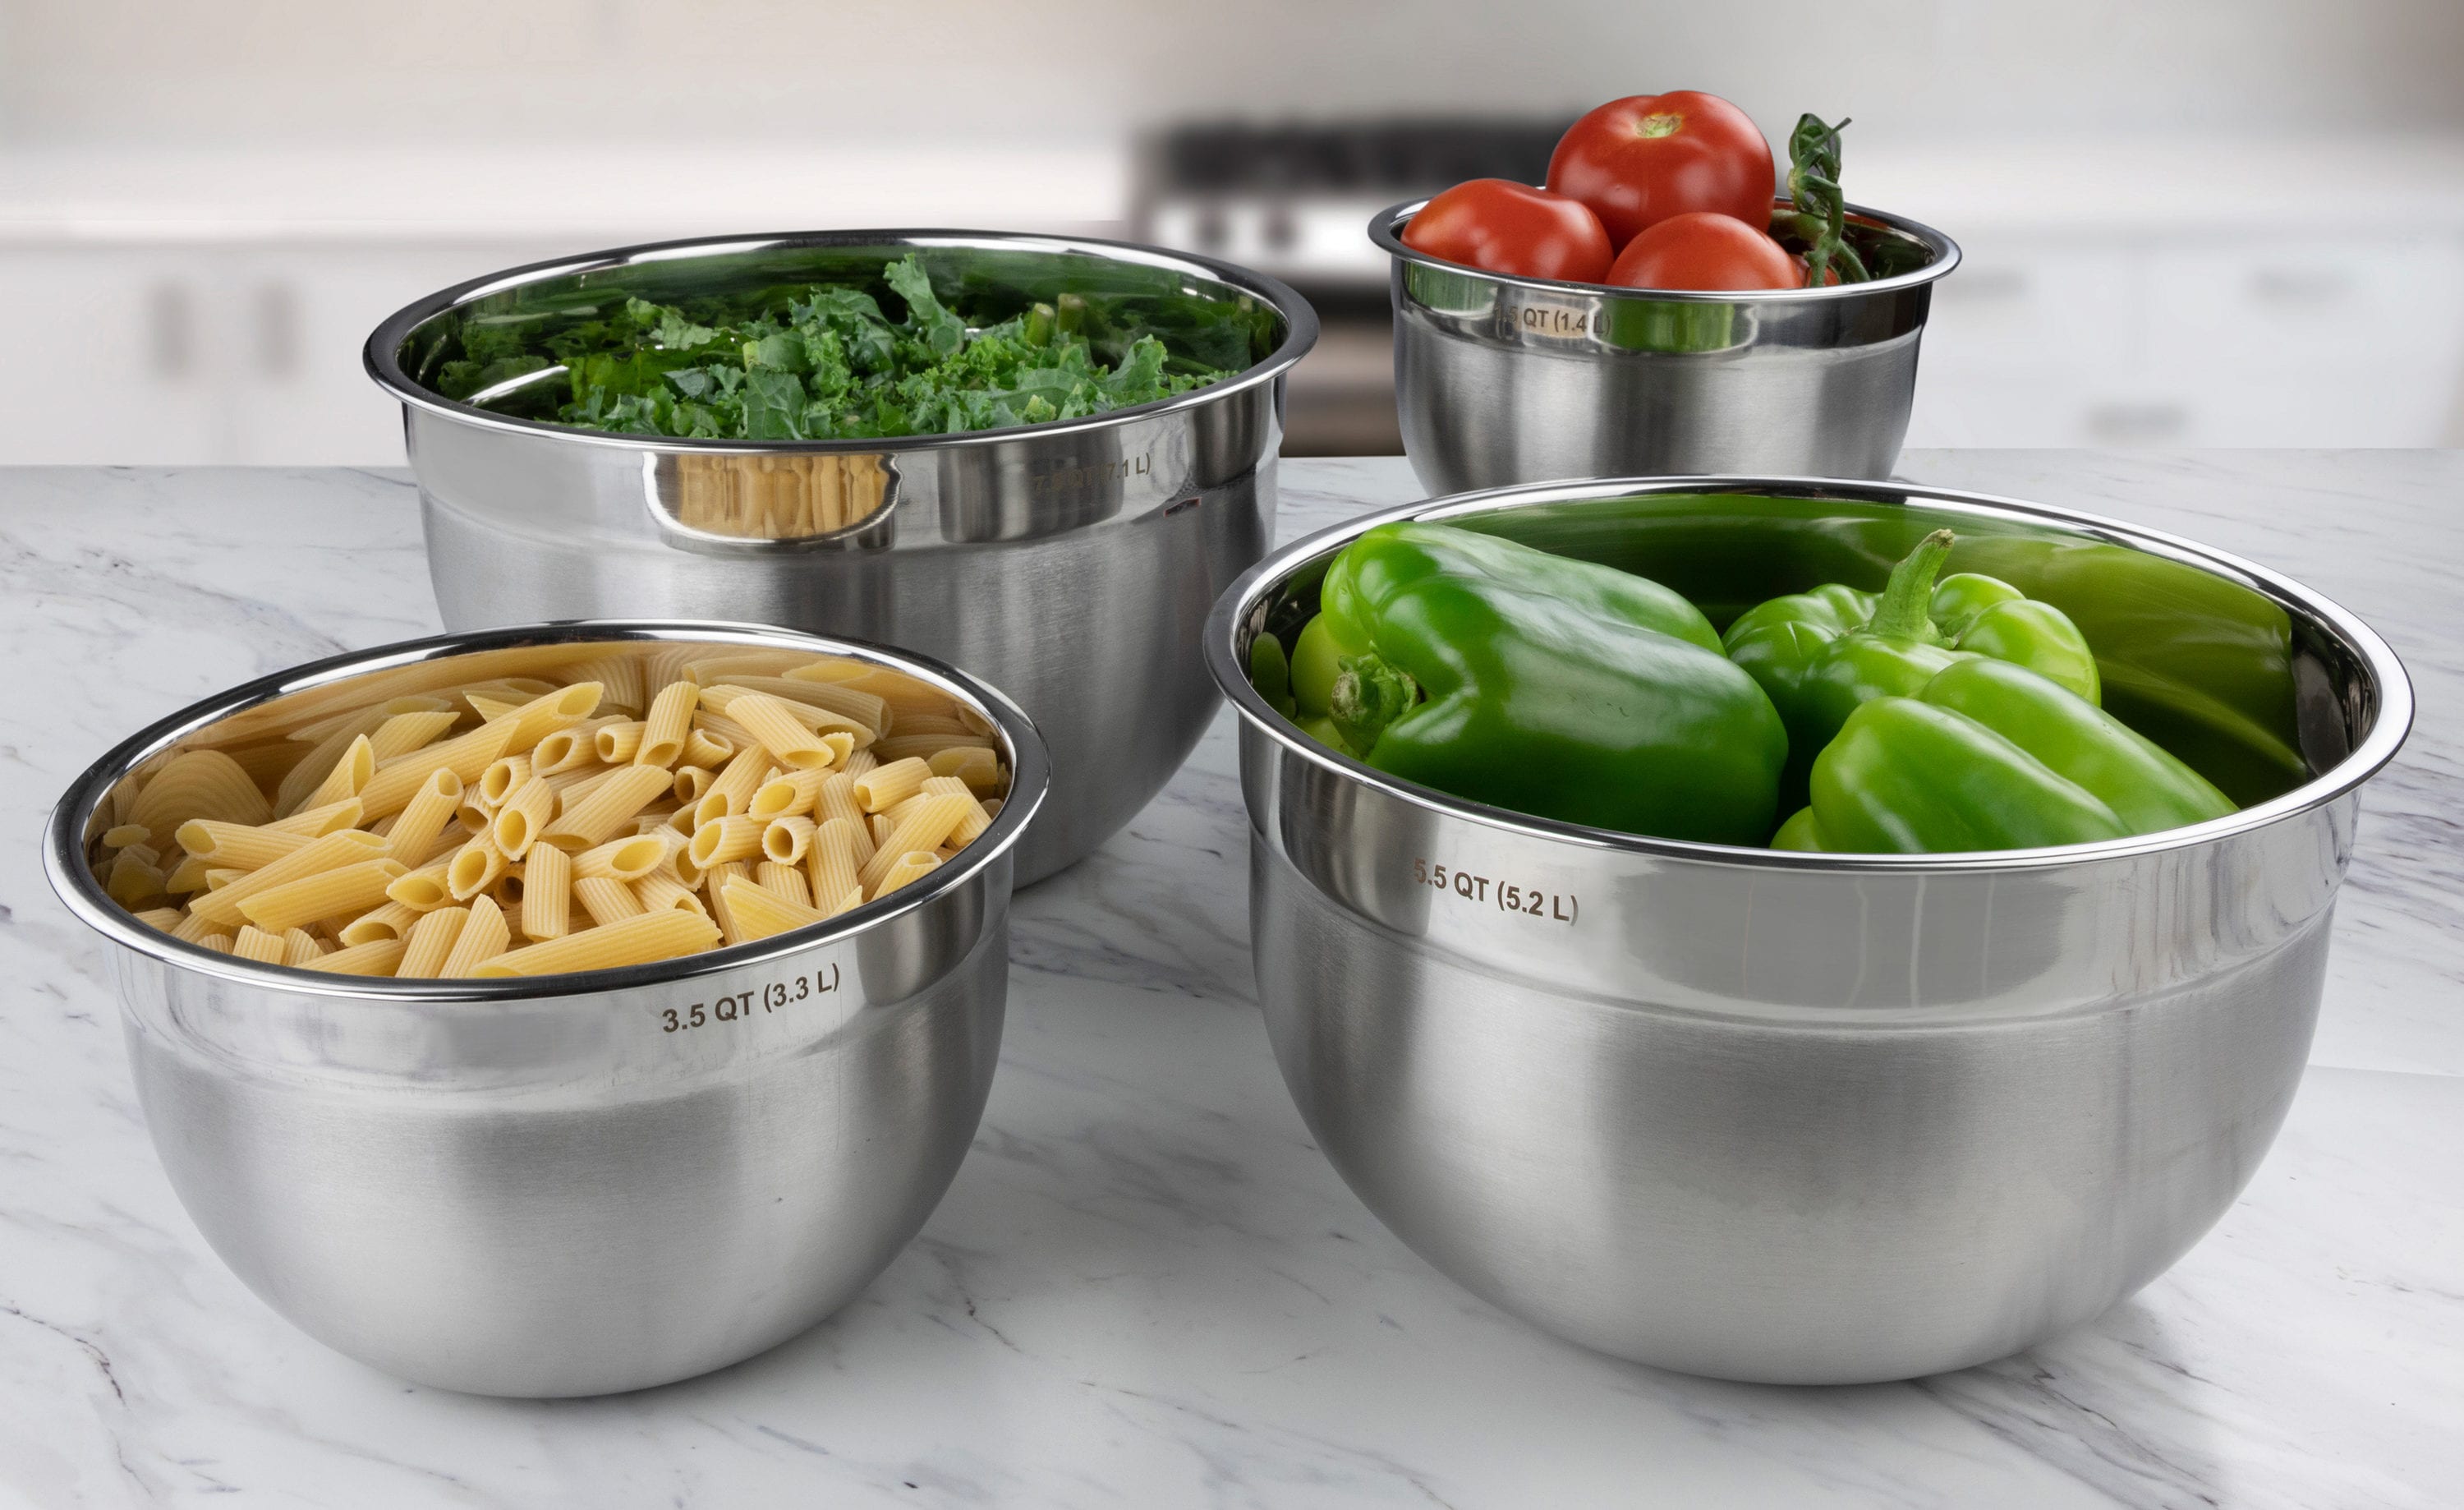 Tovolo 4-Piece Stainless Steel Mixing Bowl Set in the Kitchen Tools  department at